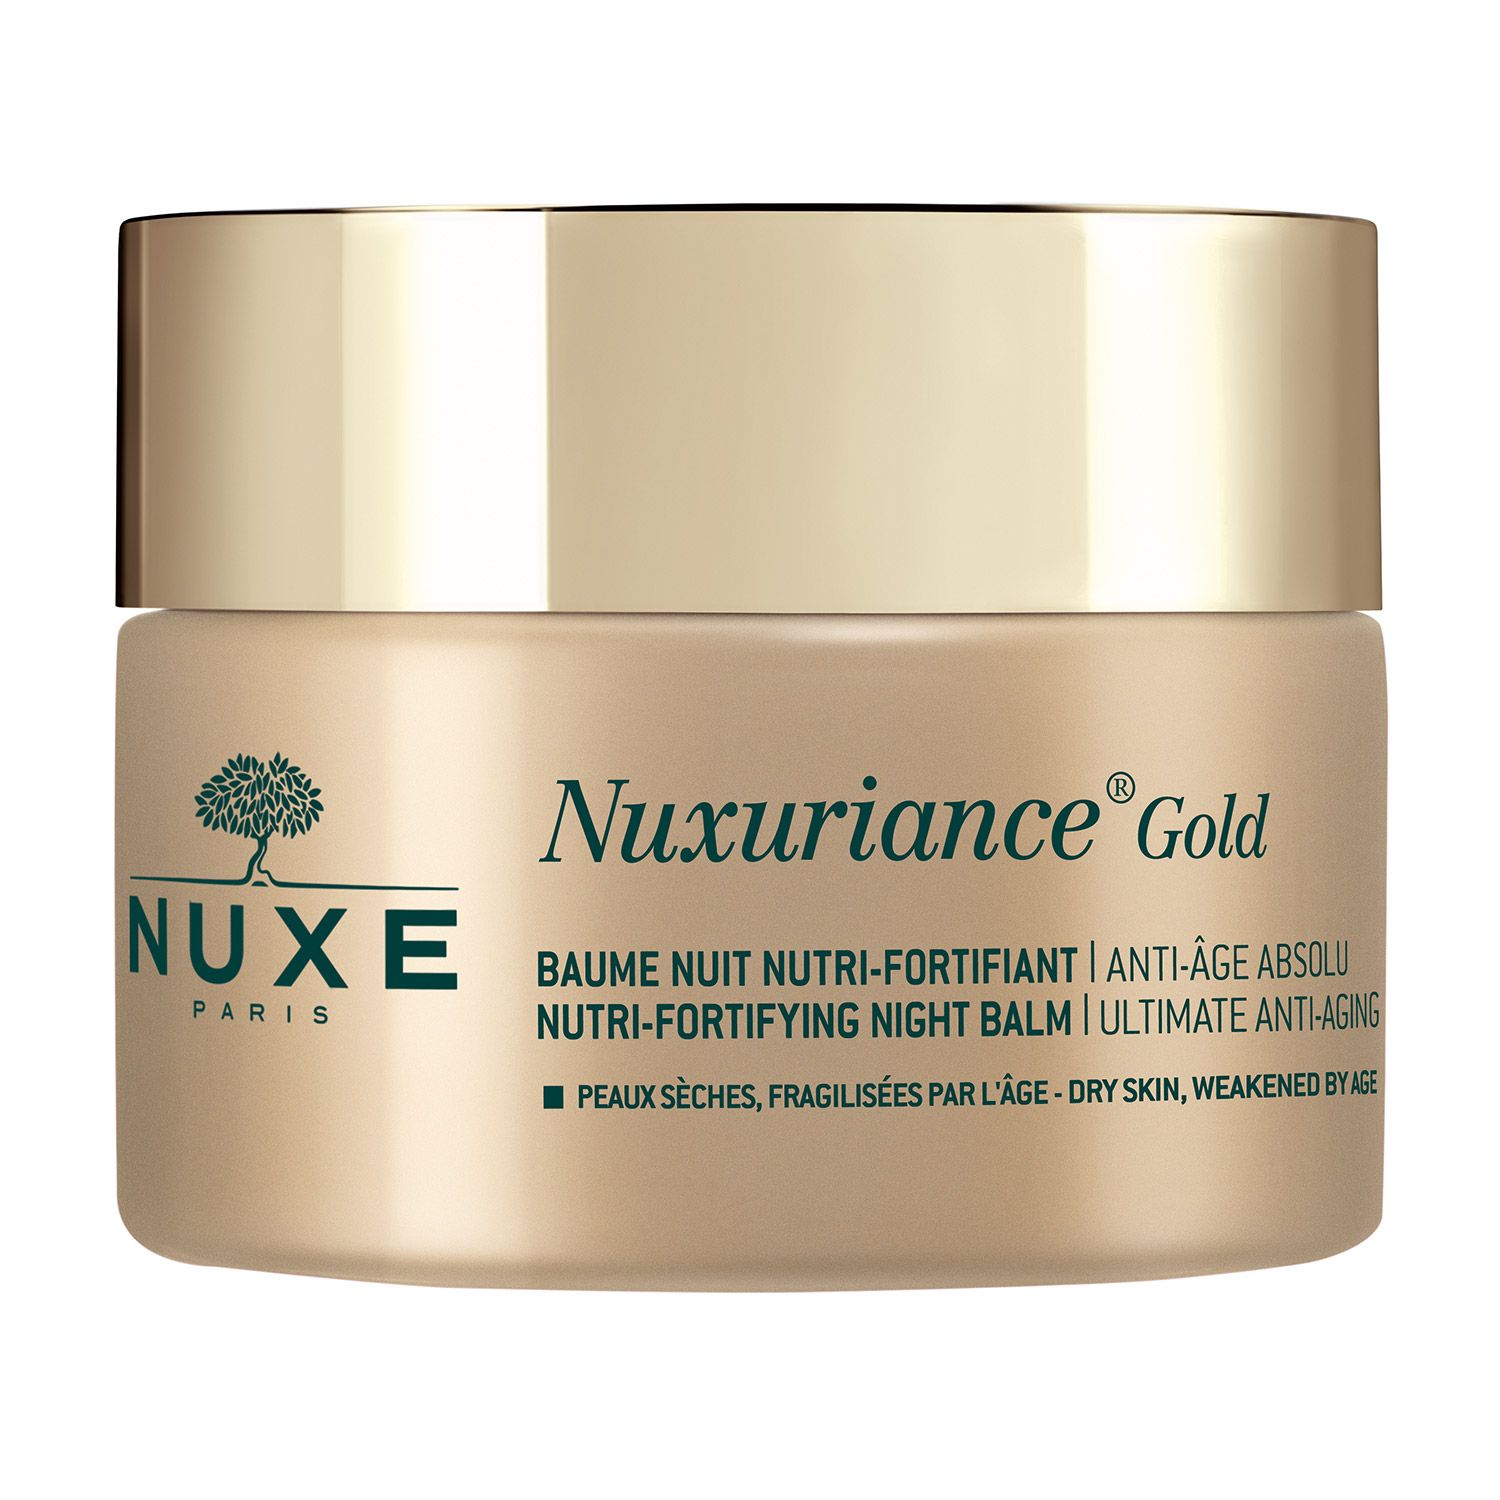 Nuxe Nuxuriance Gold Balsamo Notte Nutriente Fortificante 50ml